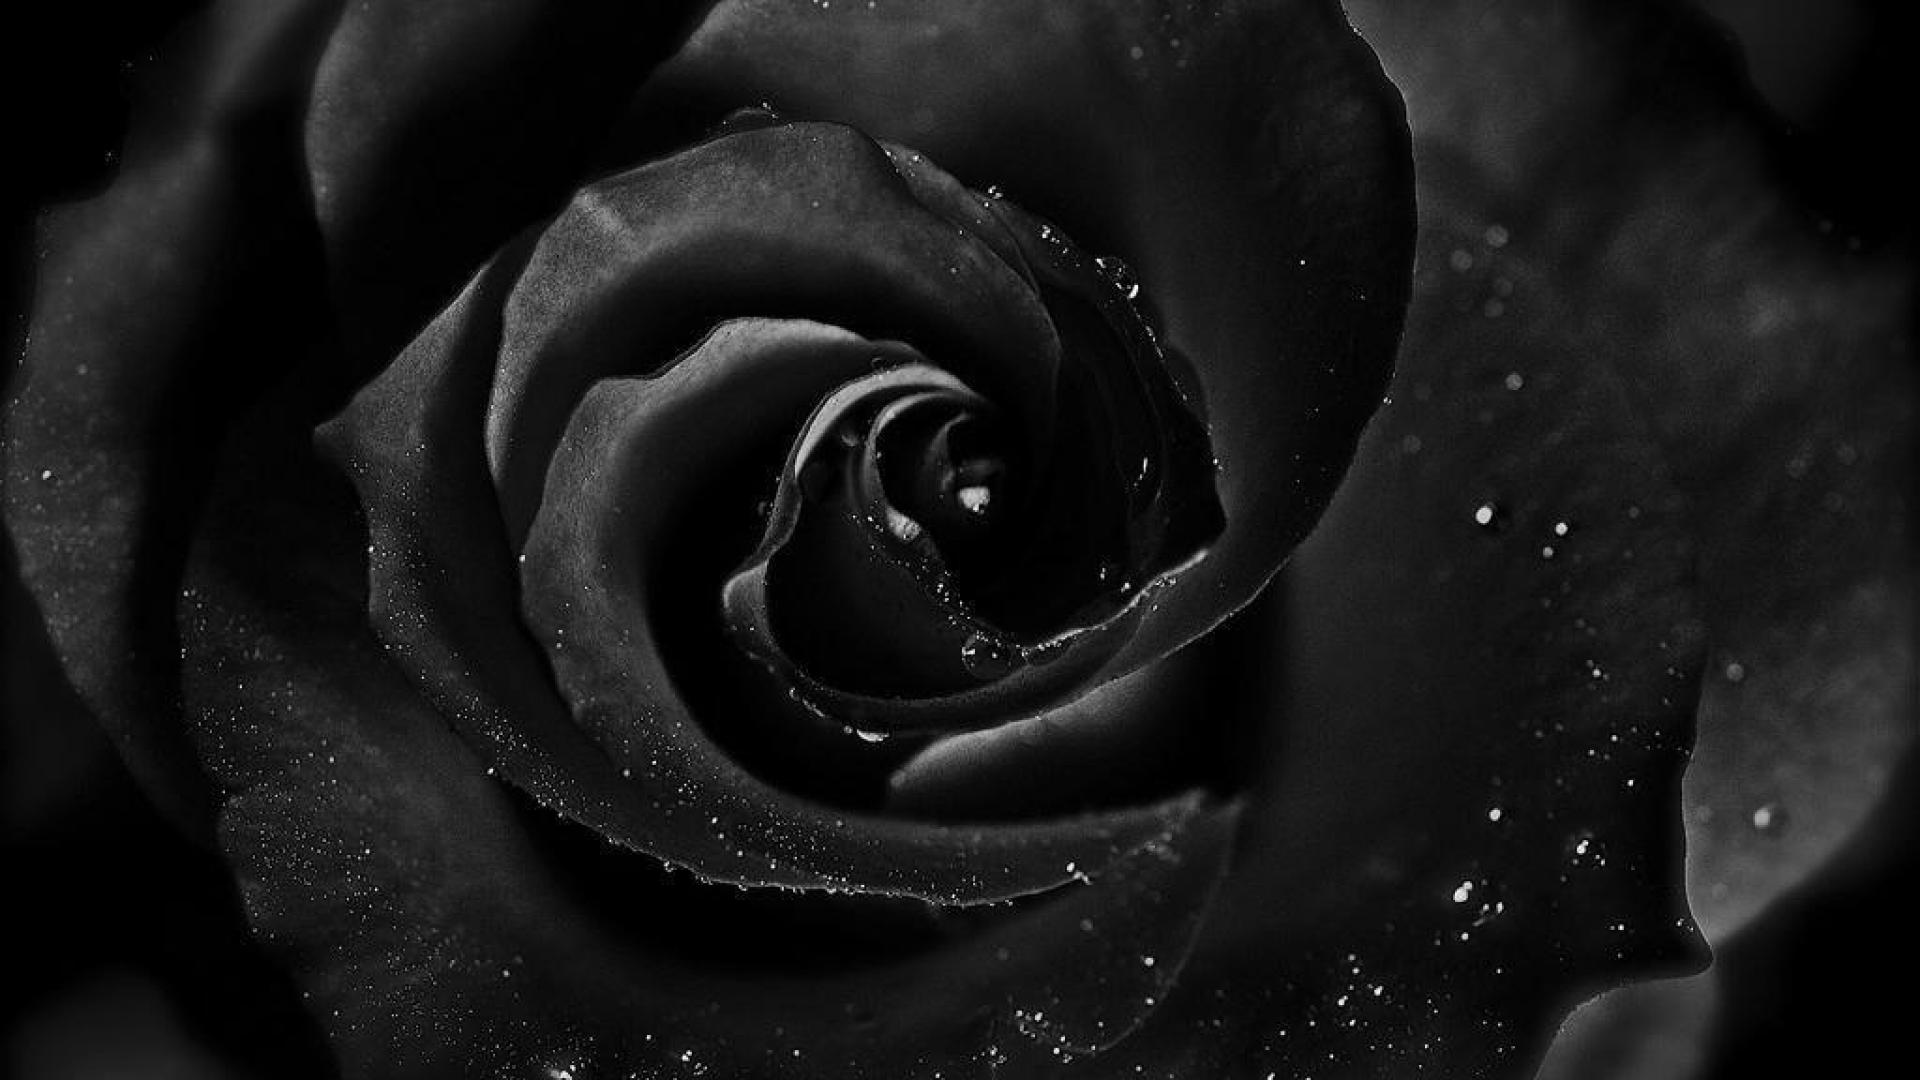 Free download Black Rose Wallpaper HD Wallpapers Backgrounds Images Art Photos [1920x1080] for